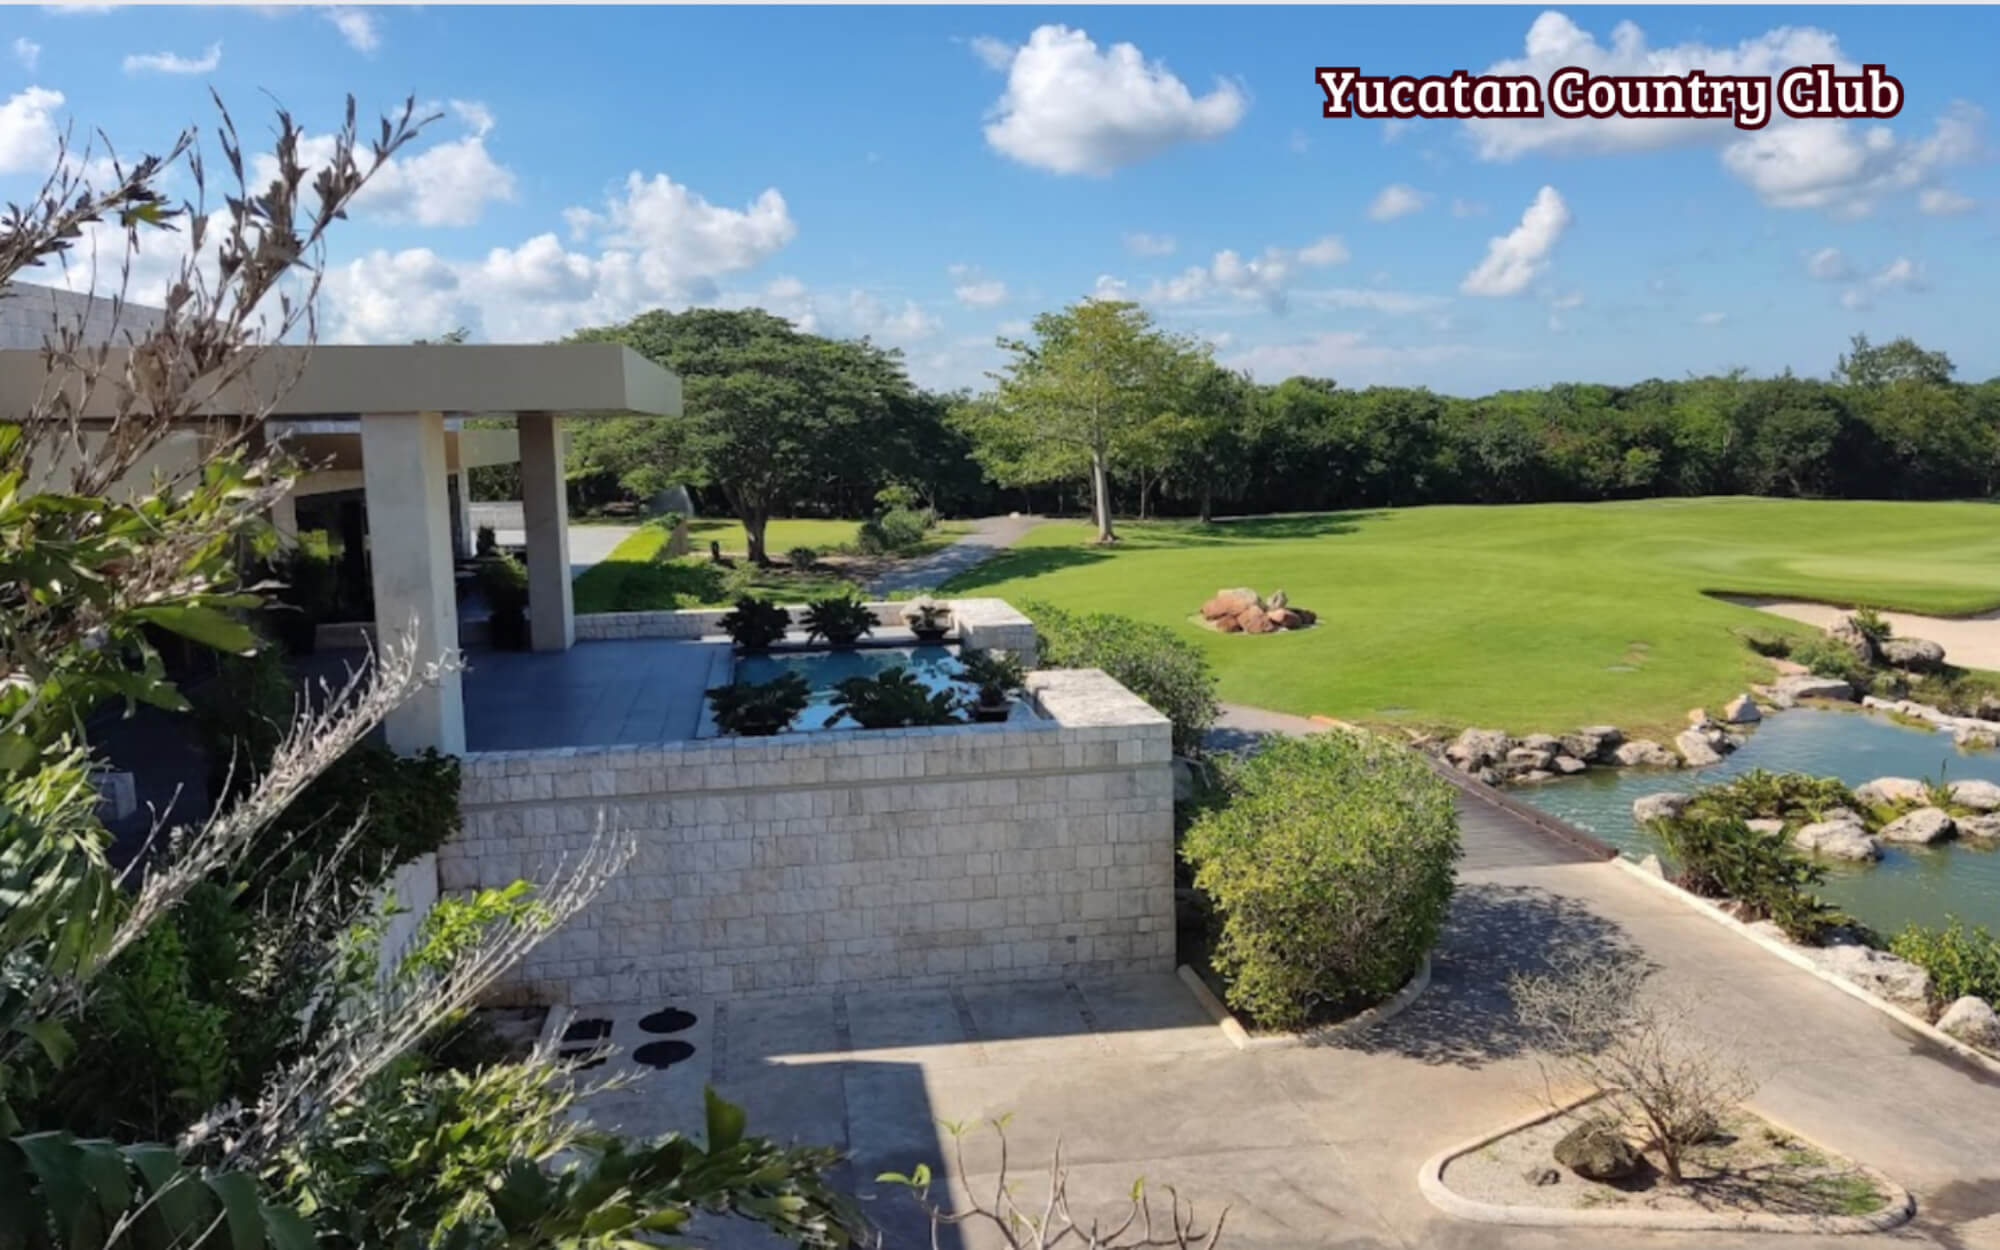 Residence with garden and private pool in gated community with golf course and clubhouse with sports courts and amenities, Yucatan Country C